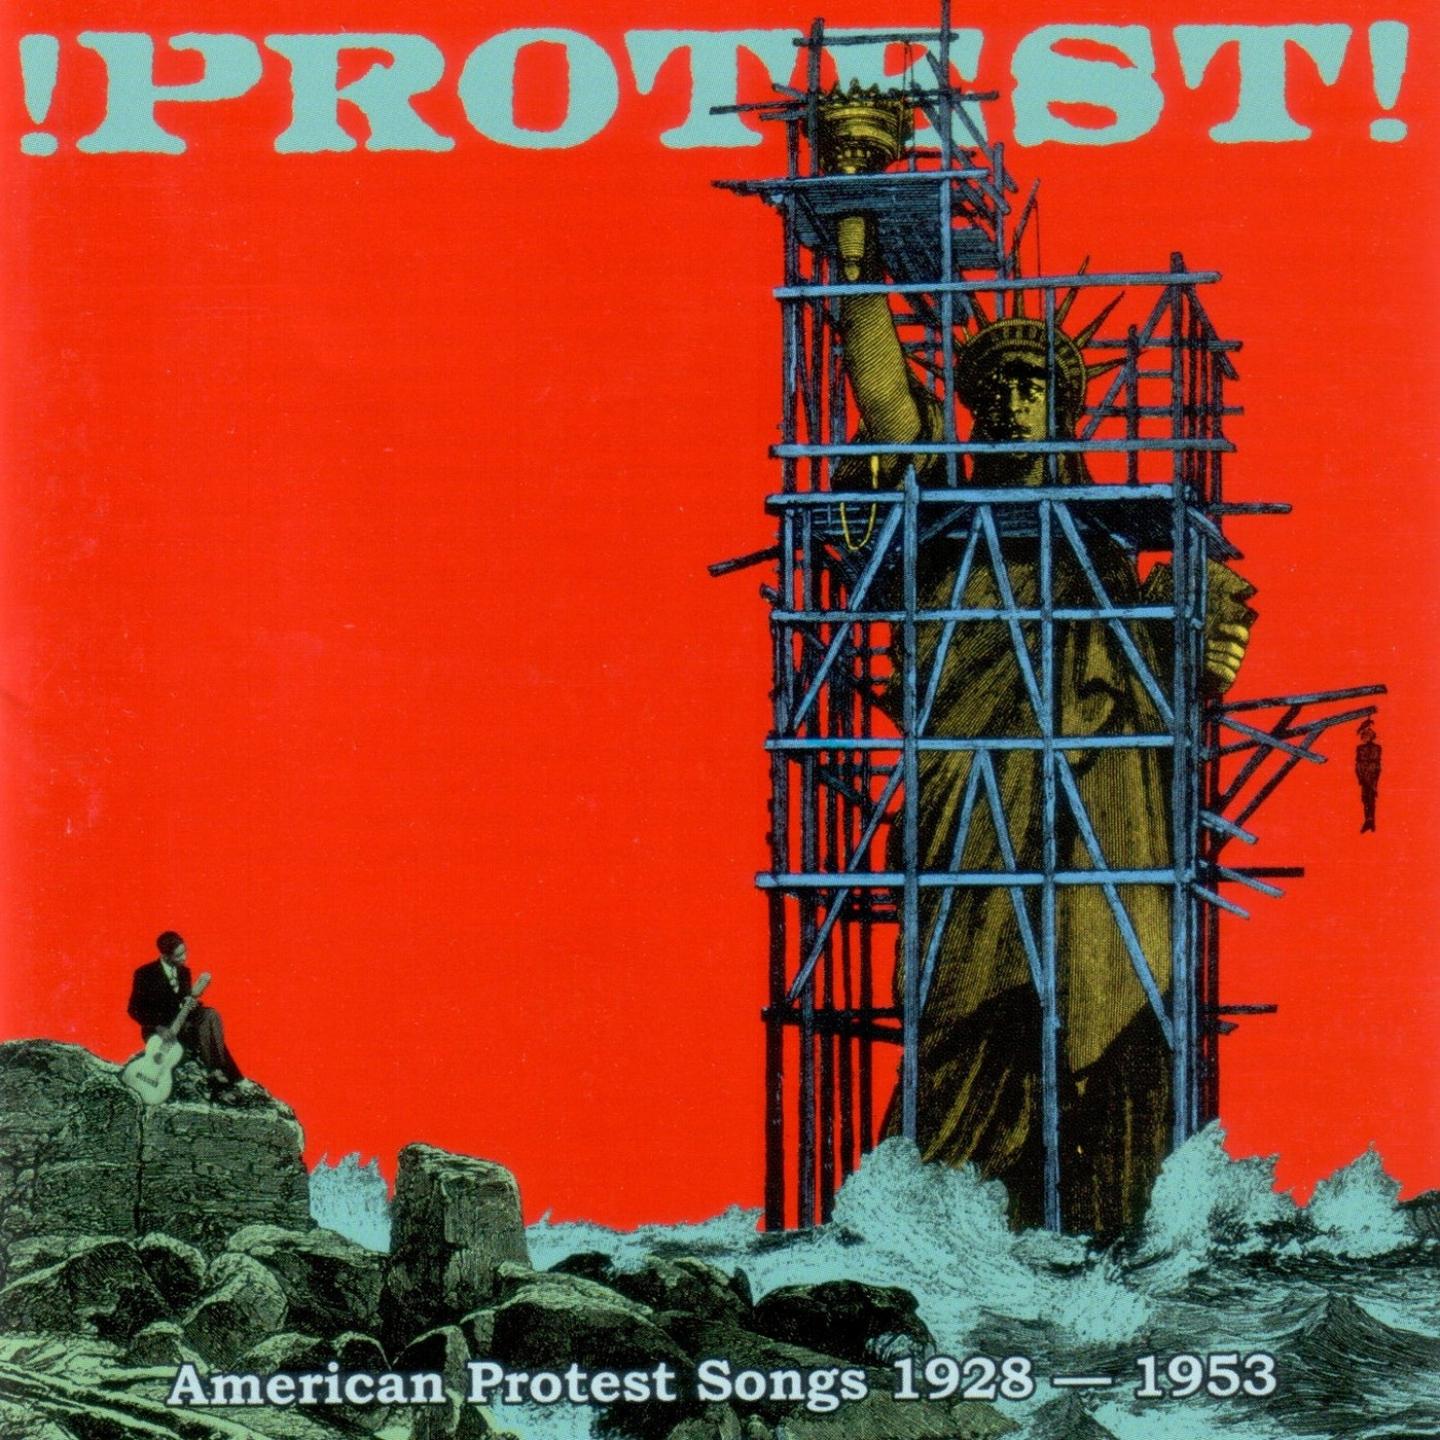 !Protest! American Protest Songs 1928-1953